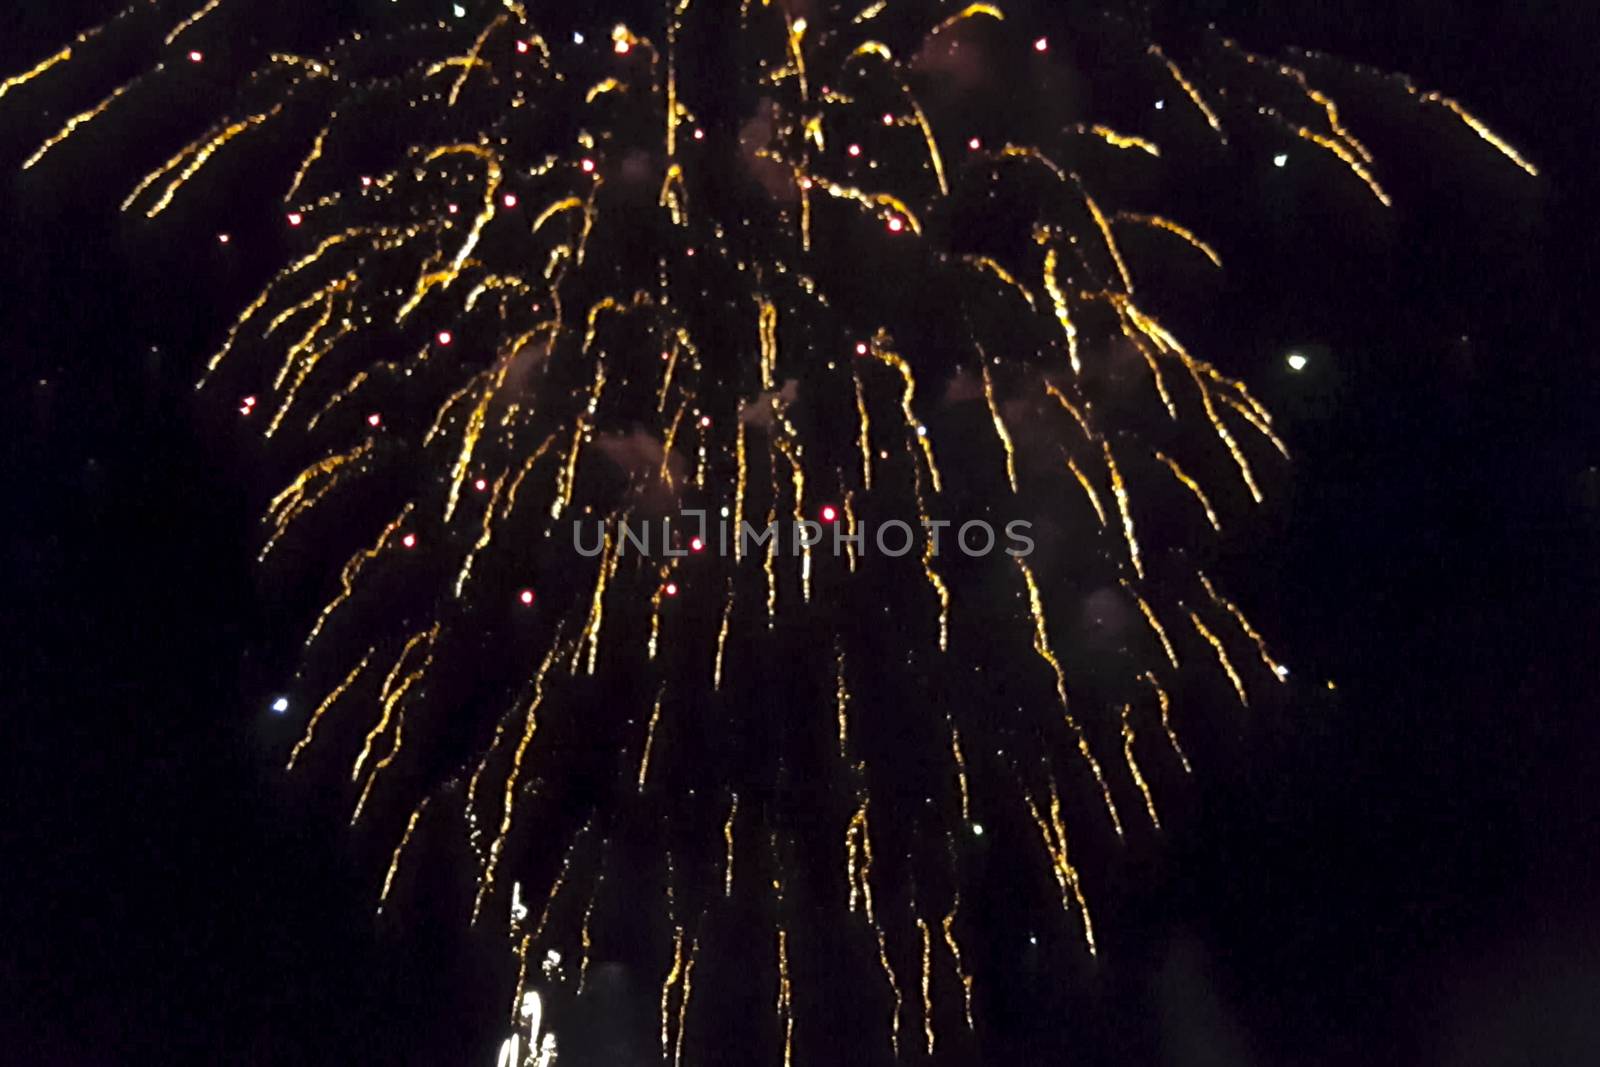 Festive salute in the night sky. Explosions of fireworks.